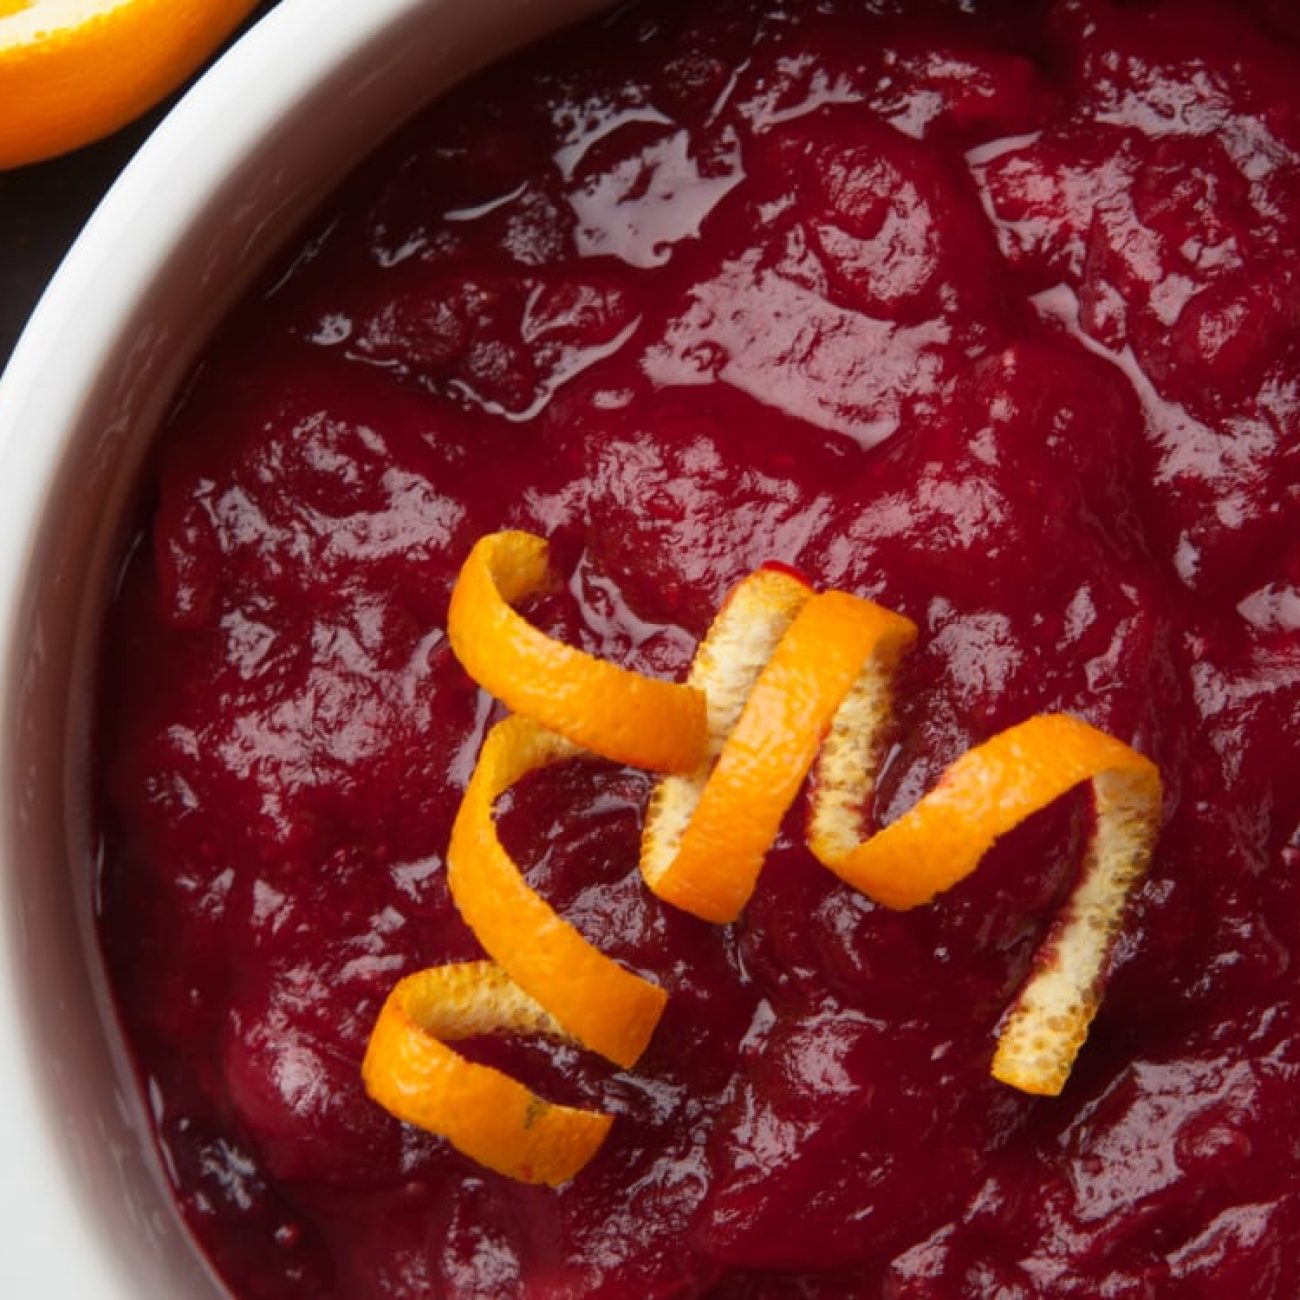 Cranberry Sauce with a Twist: How to Make Your Holiday Table Shine with Spiced Cranberry Delight